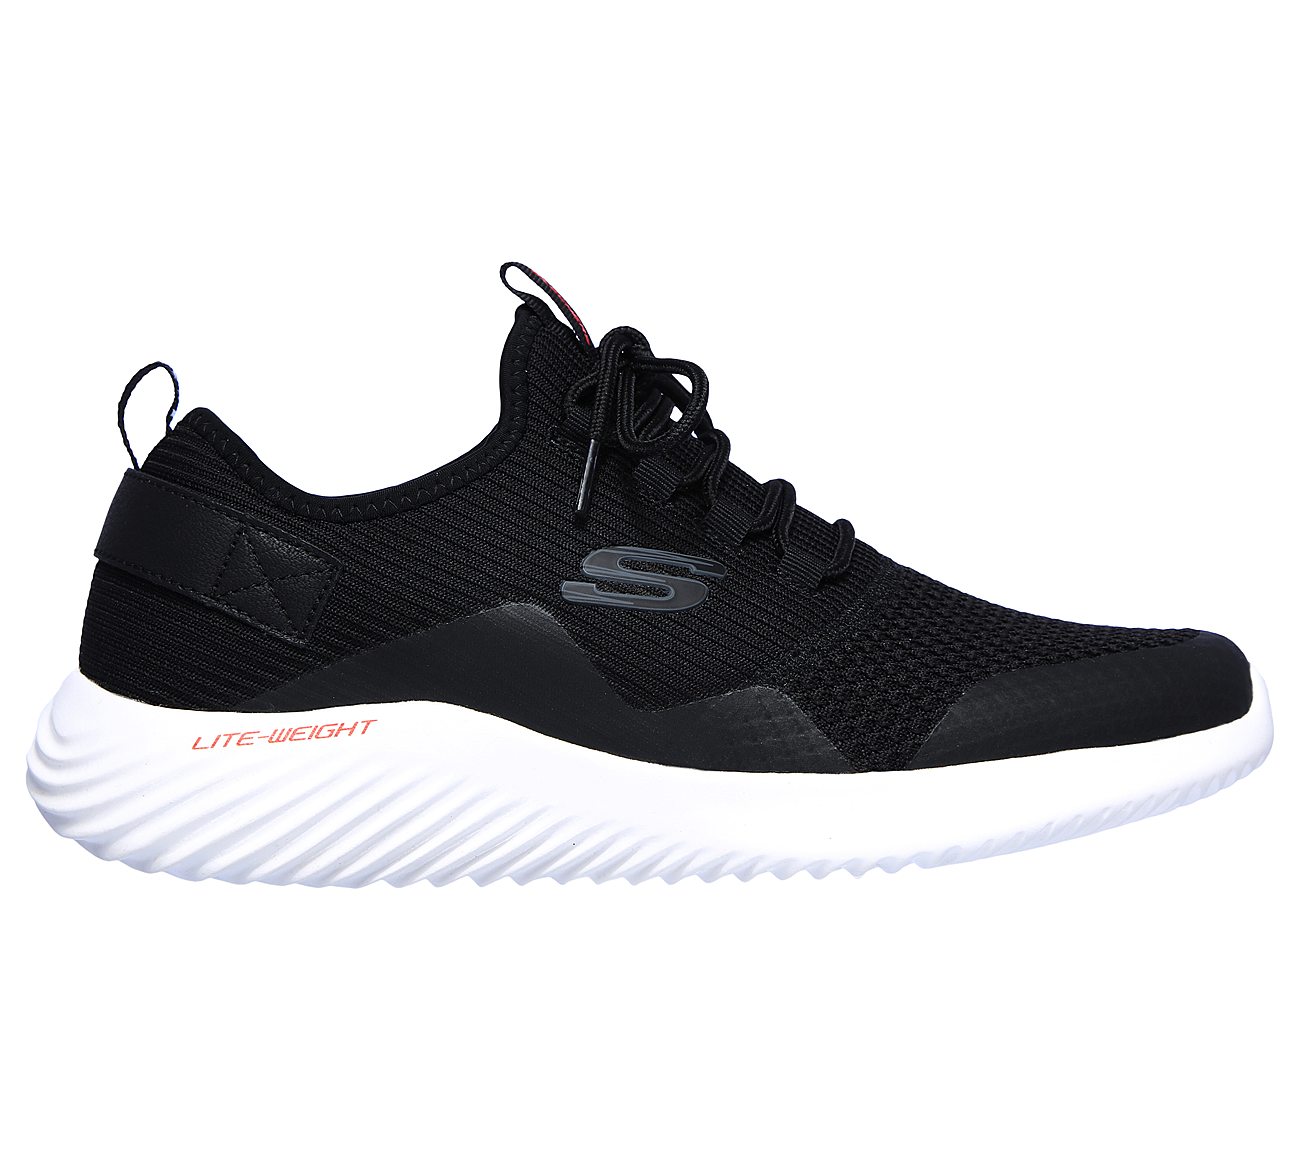 skechers soft knitted